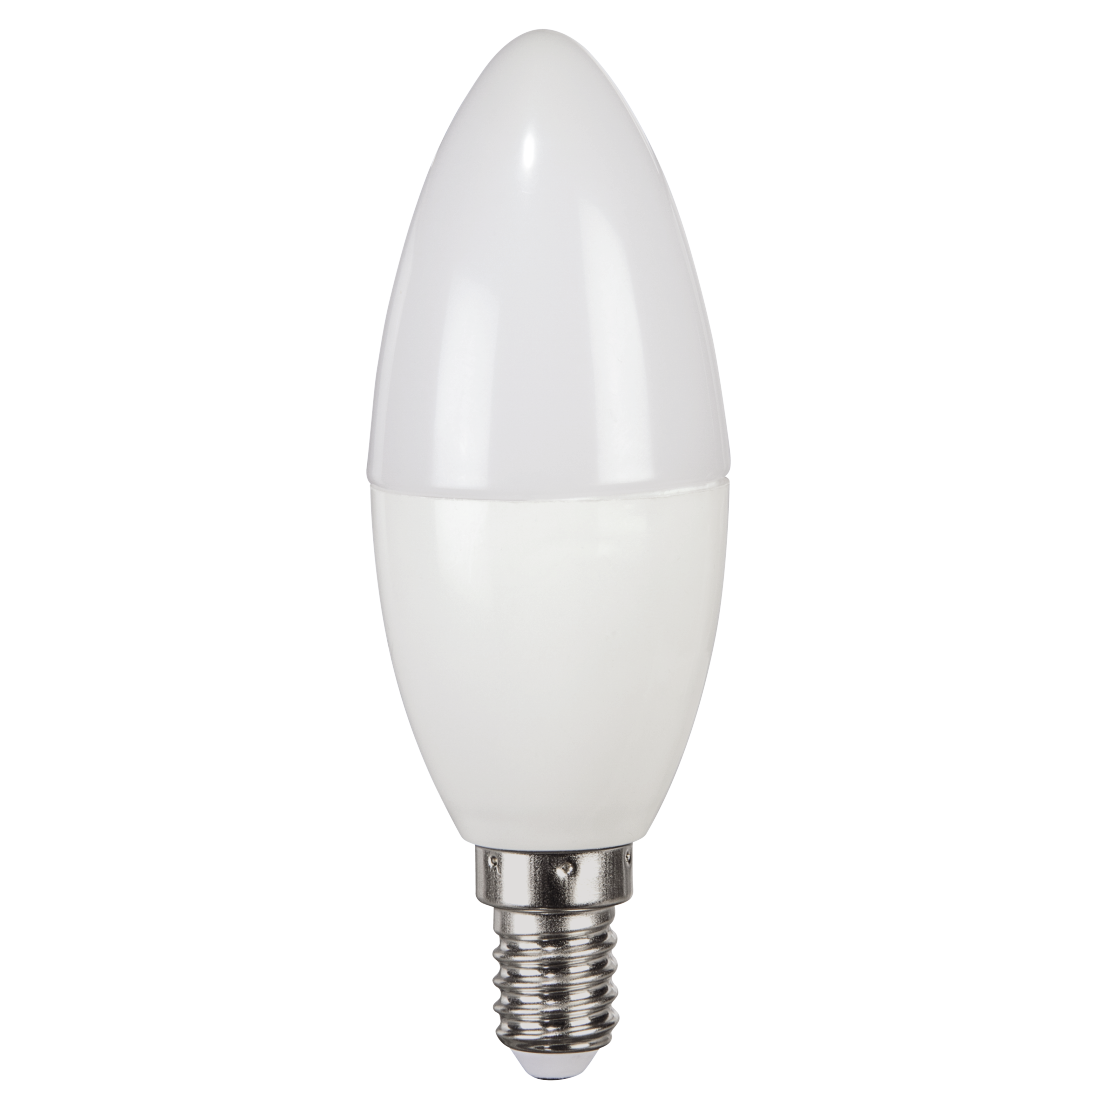 abx High-Res Image - Xavax, LED Bulb, E14, 470 lm replaces 40W, Candle Bulb, warm white, 3-stage dim.